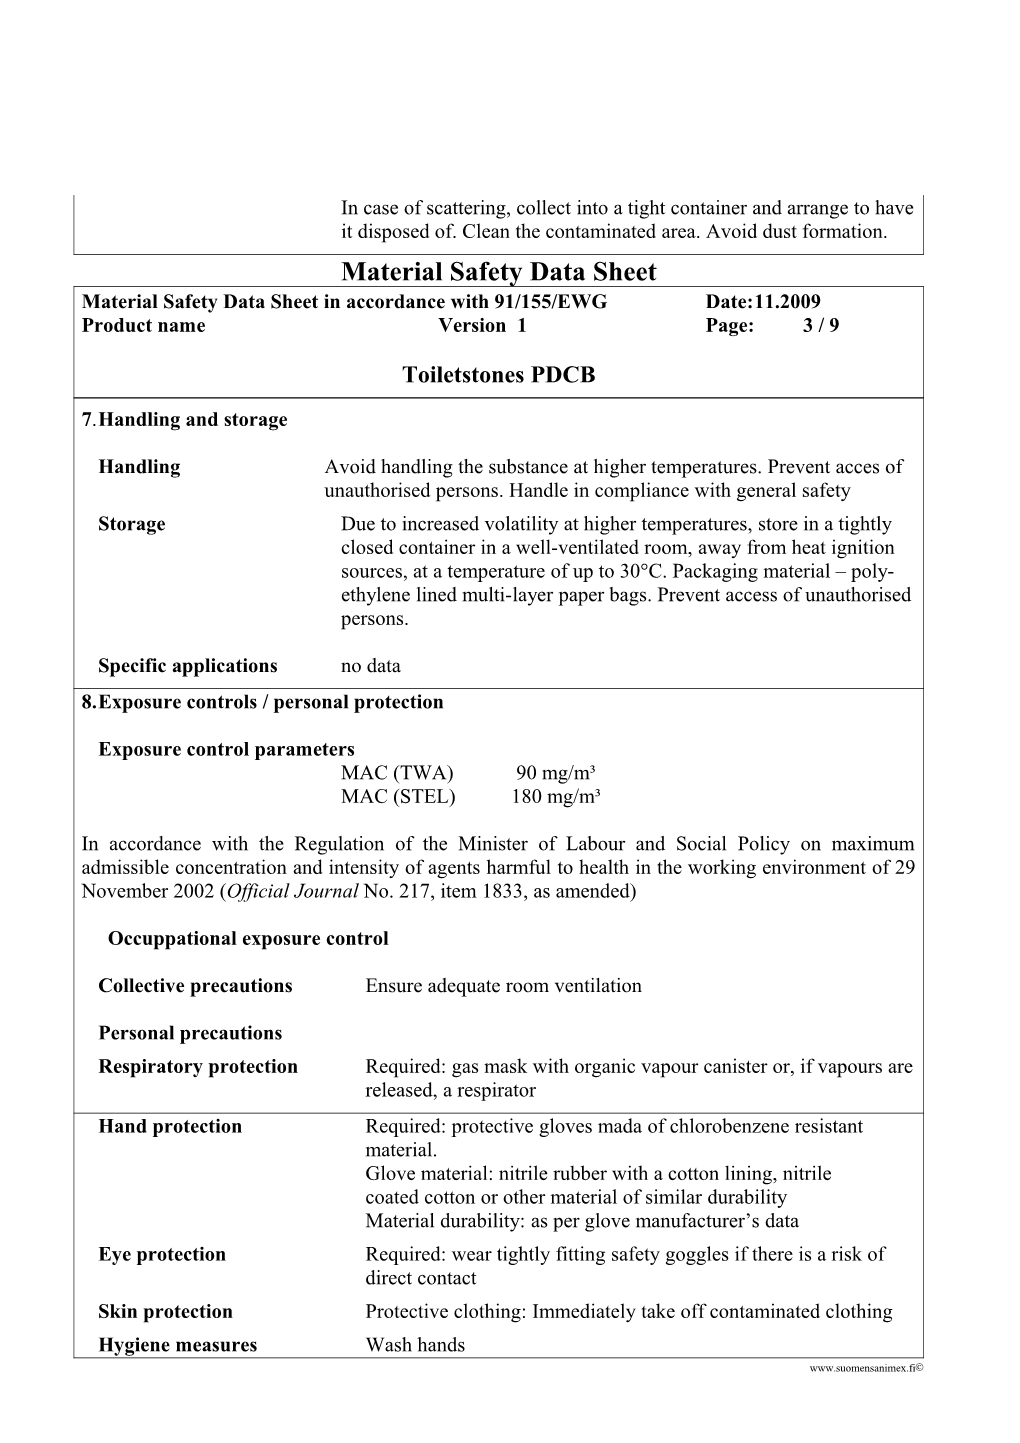 Material Safety Data Sheet s117